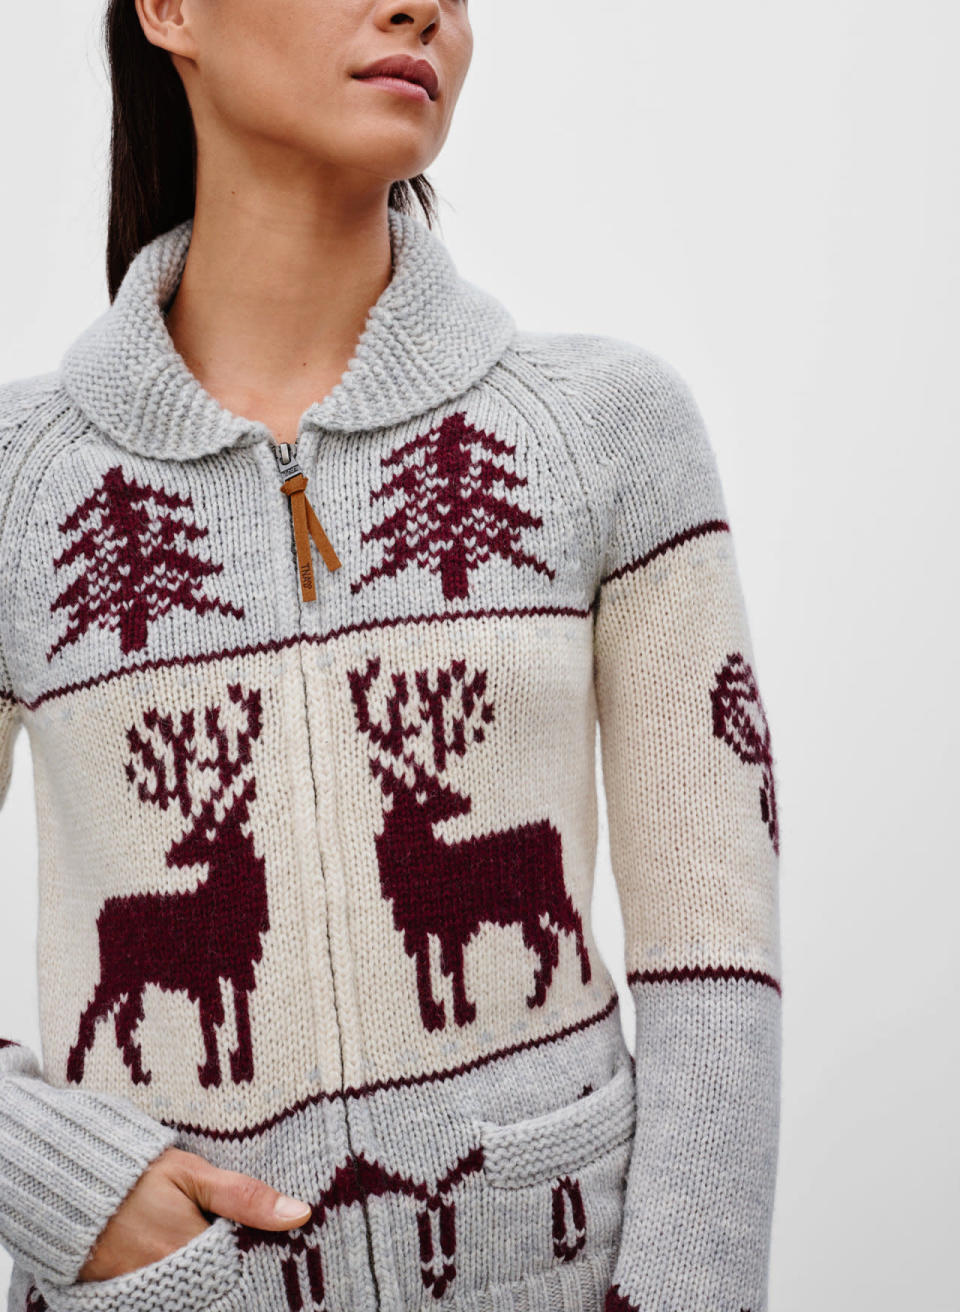 This zip-up sweater is perfect for all your reindeer games. (TNA, $55)